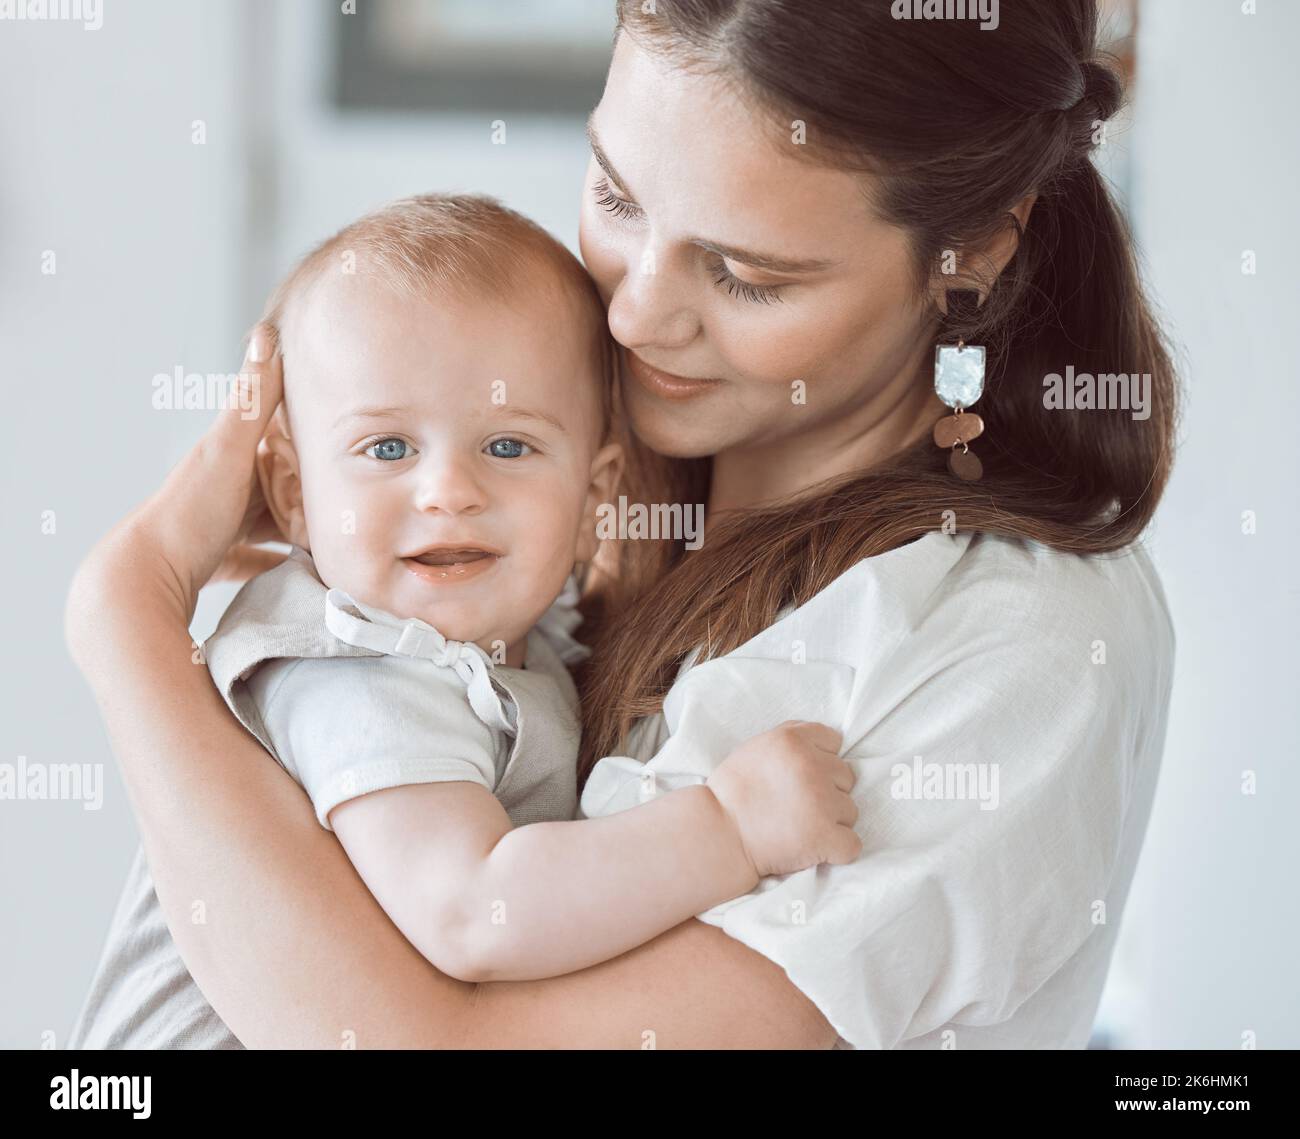 You made a miracle mama. a beautiful young mother bonding with her newborn at home. Stock Photo